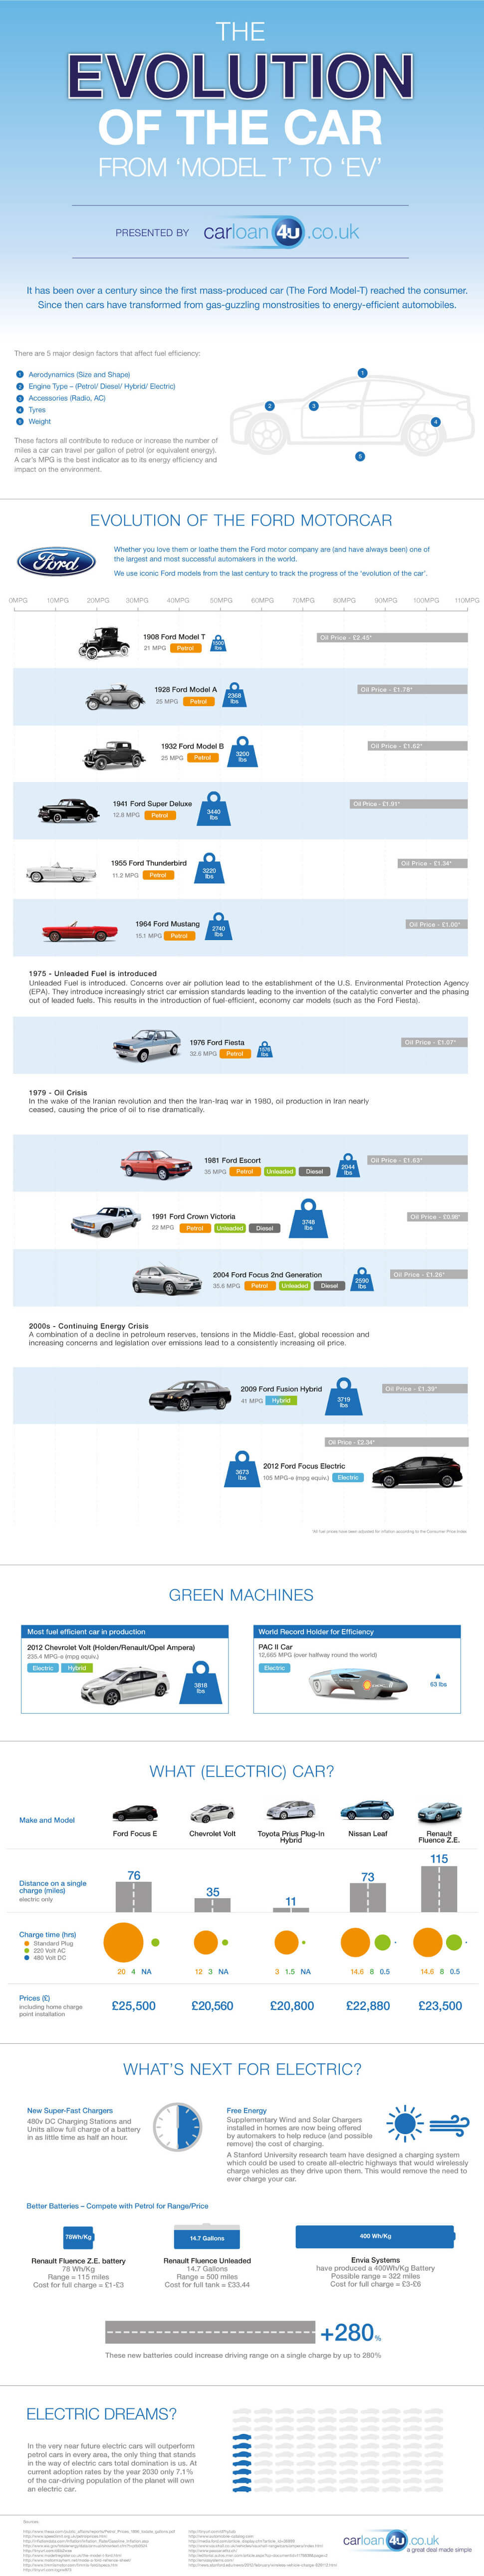 Evolution of the Car - Infographic